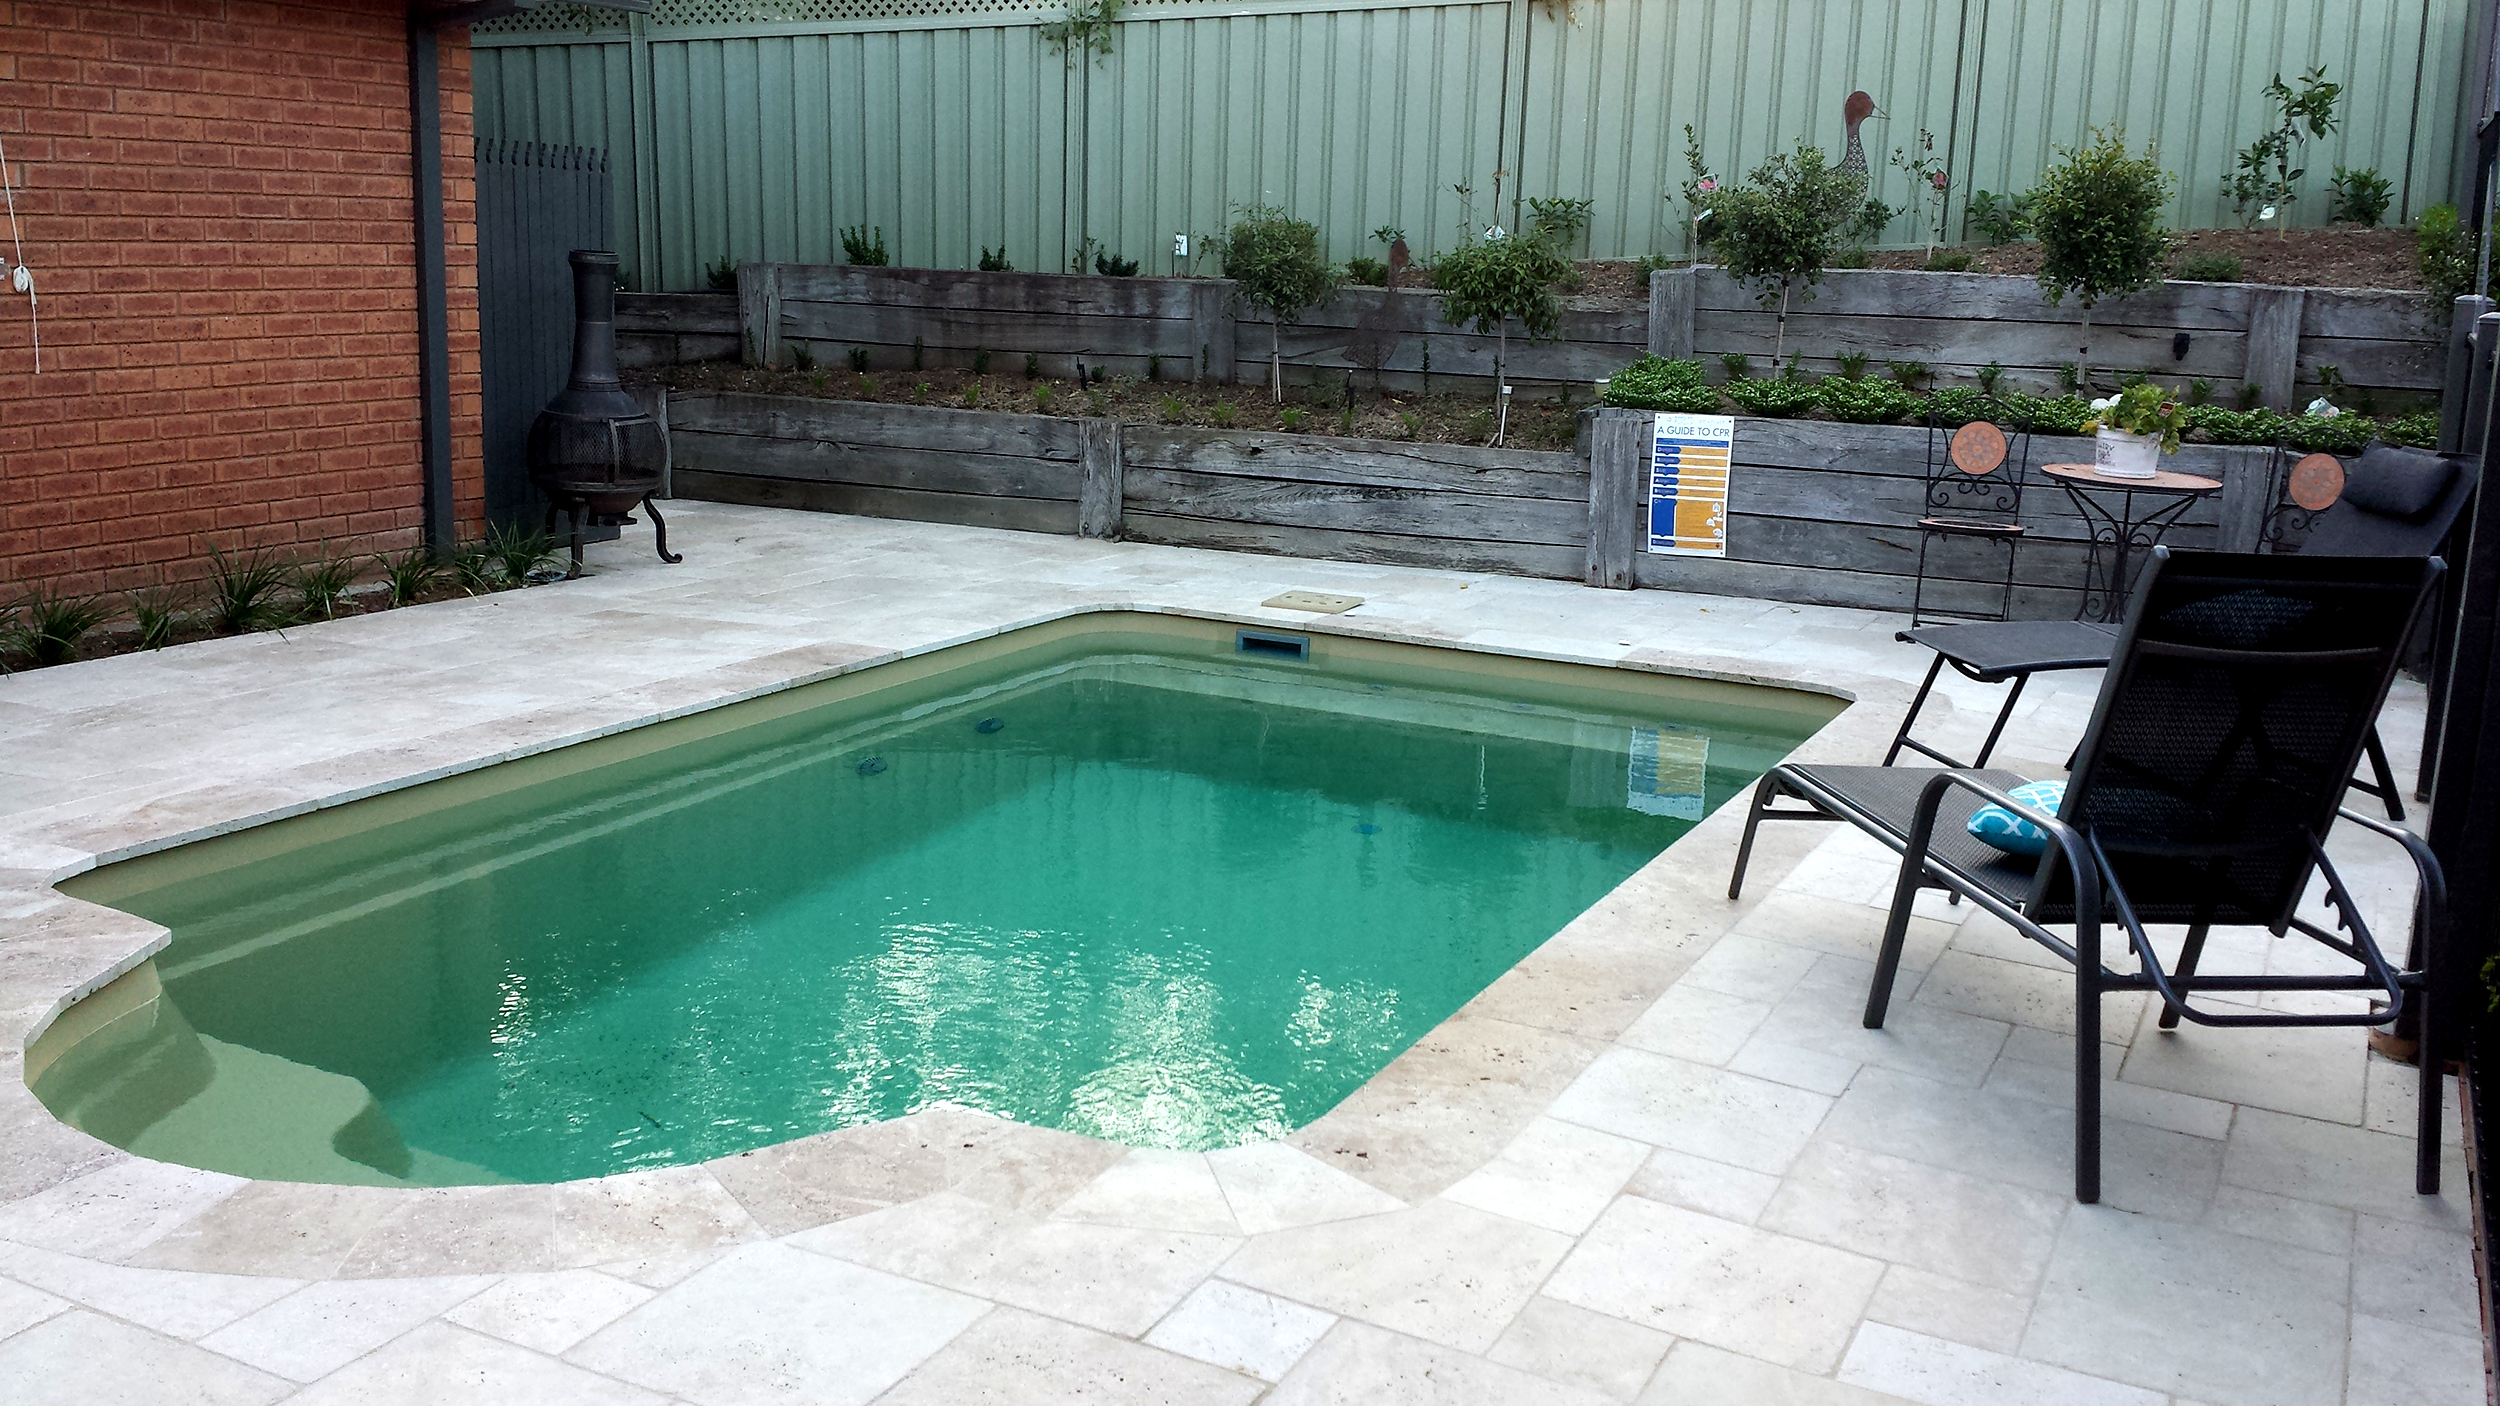  Unfilled Ivory Travertine in Pool Area 